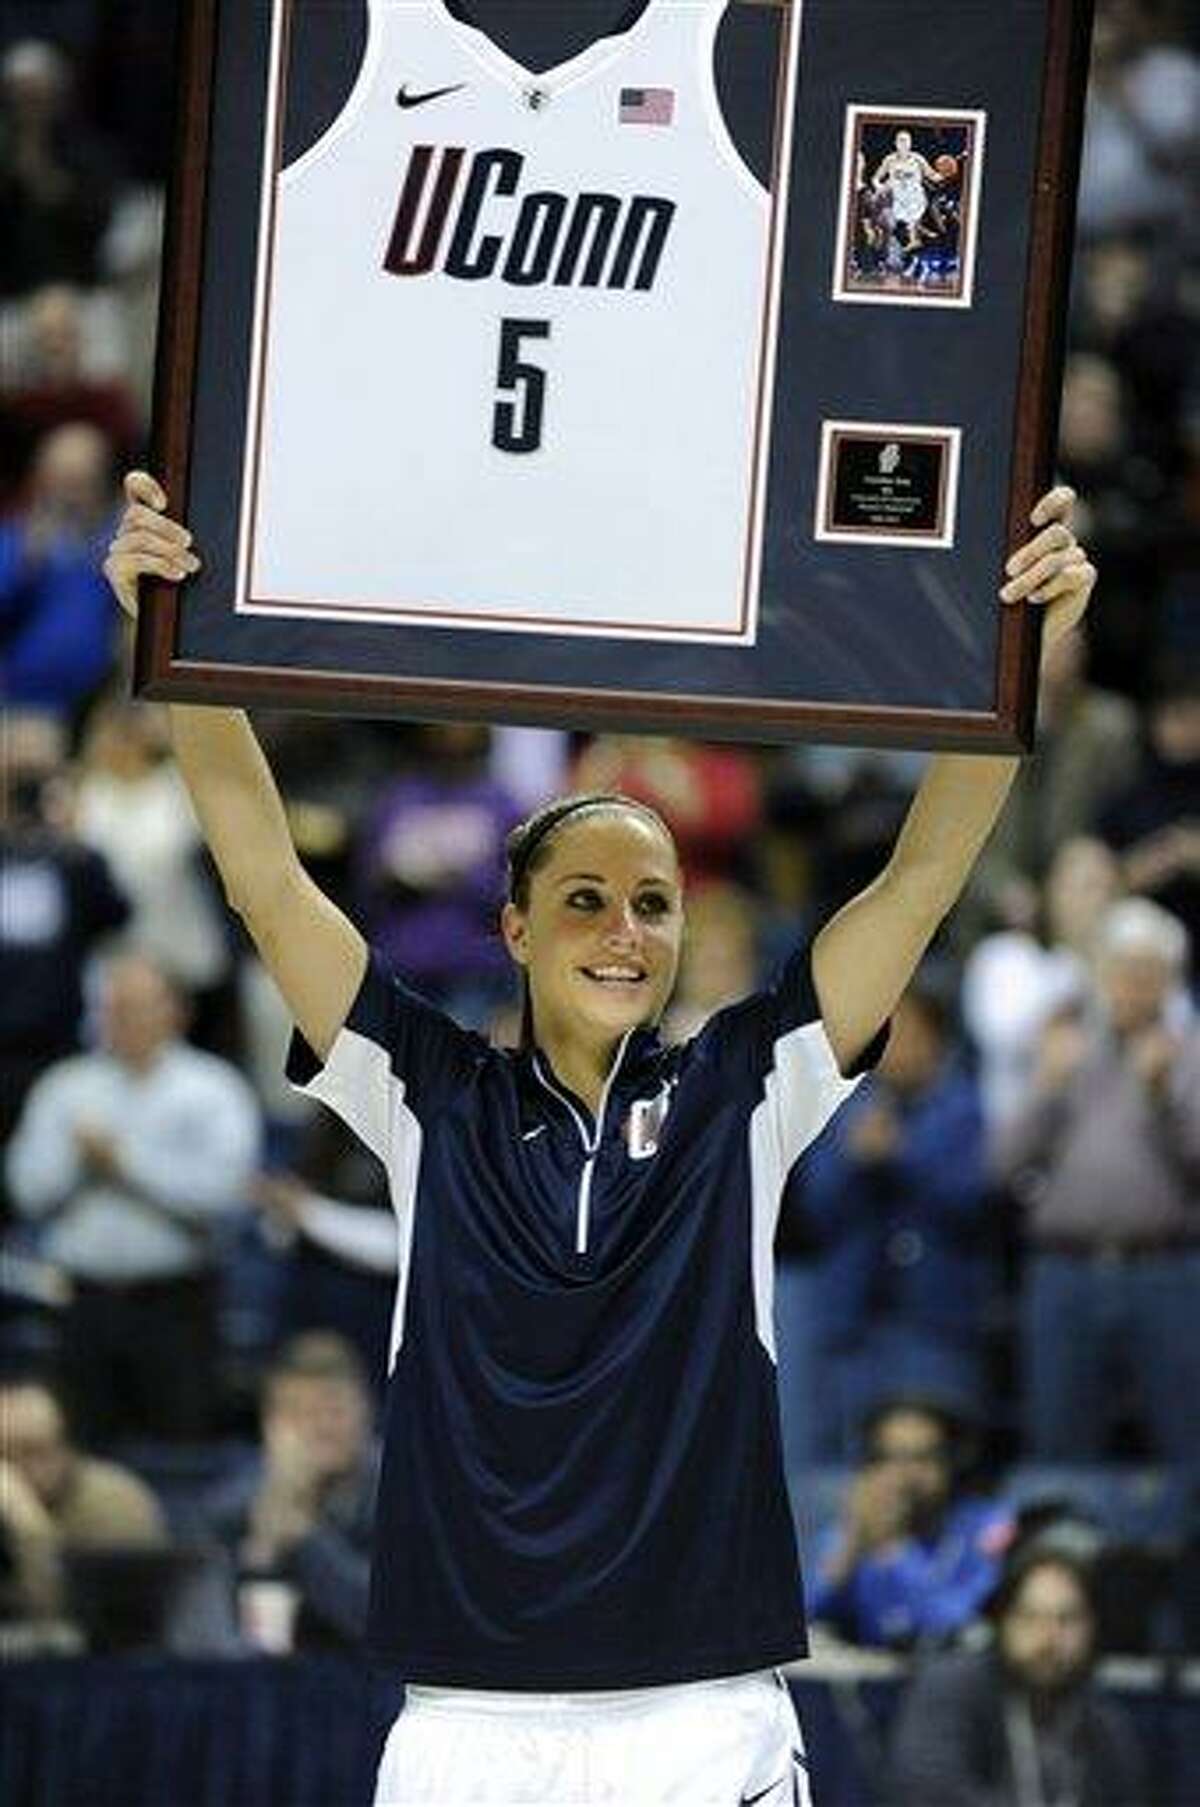 Caroline Doty holds up an award during Senior Night ceremonies before Connecticut's NCAA basketball game against Seton Hall in Storrs, Conn., Saturday, Feb. 23, 2013. (AP Photo/Fred Beckham)